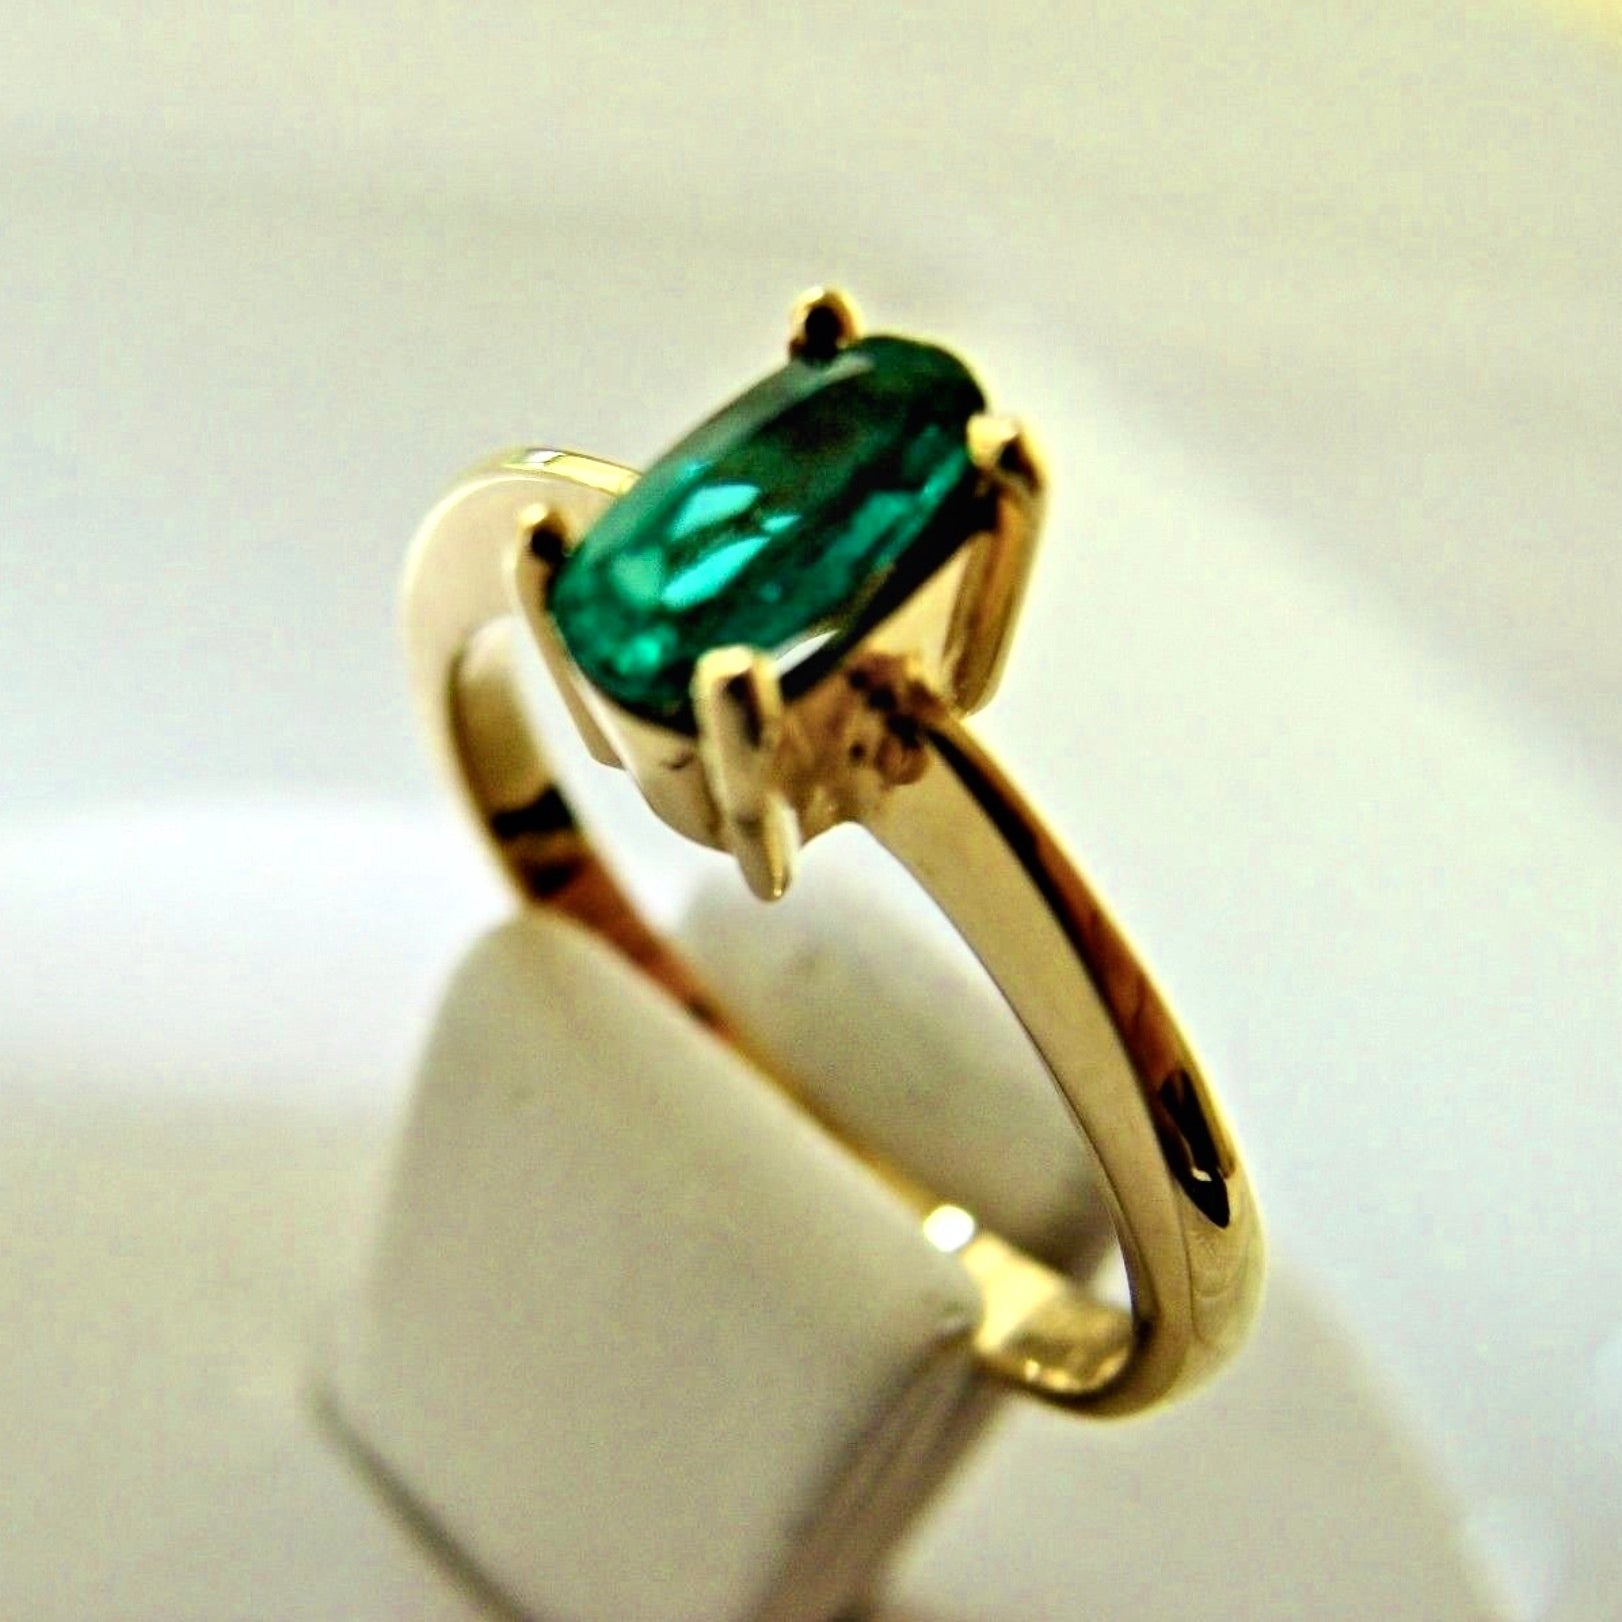 Natural Fine Natural Oval Colombian Emerald Solitaire Ring 18K Gold